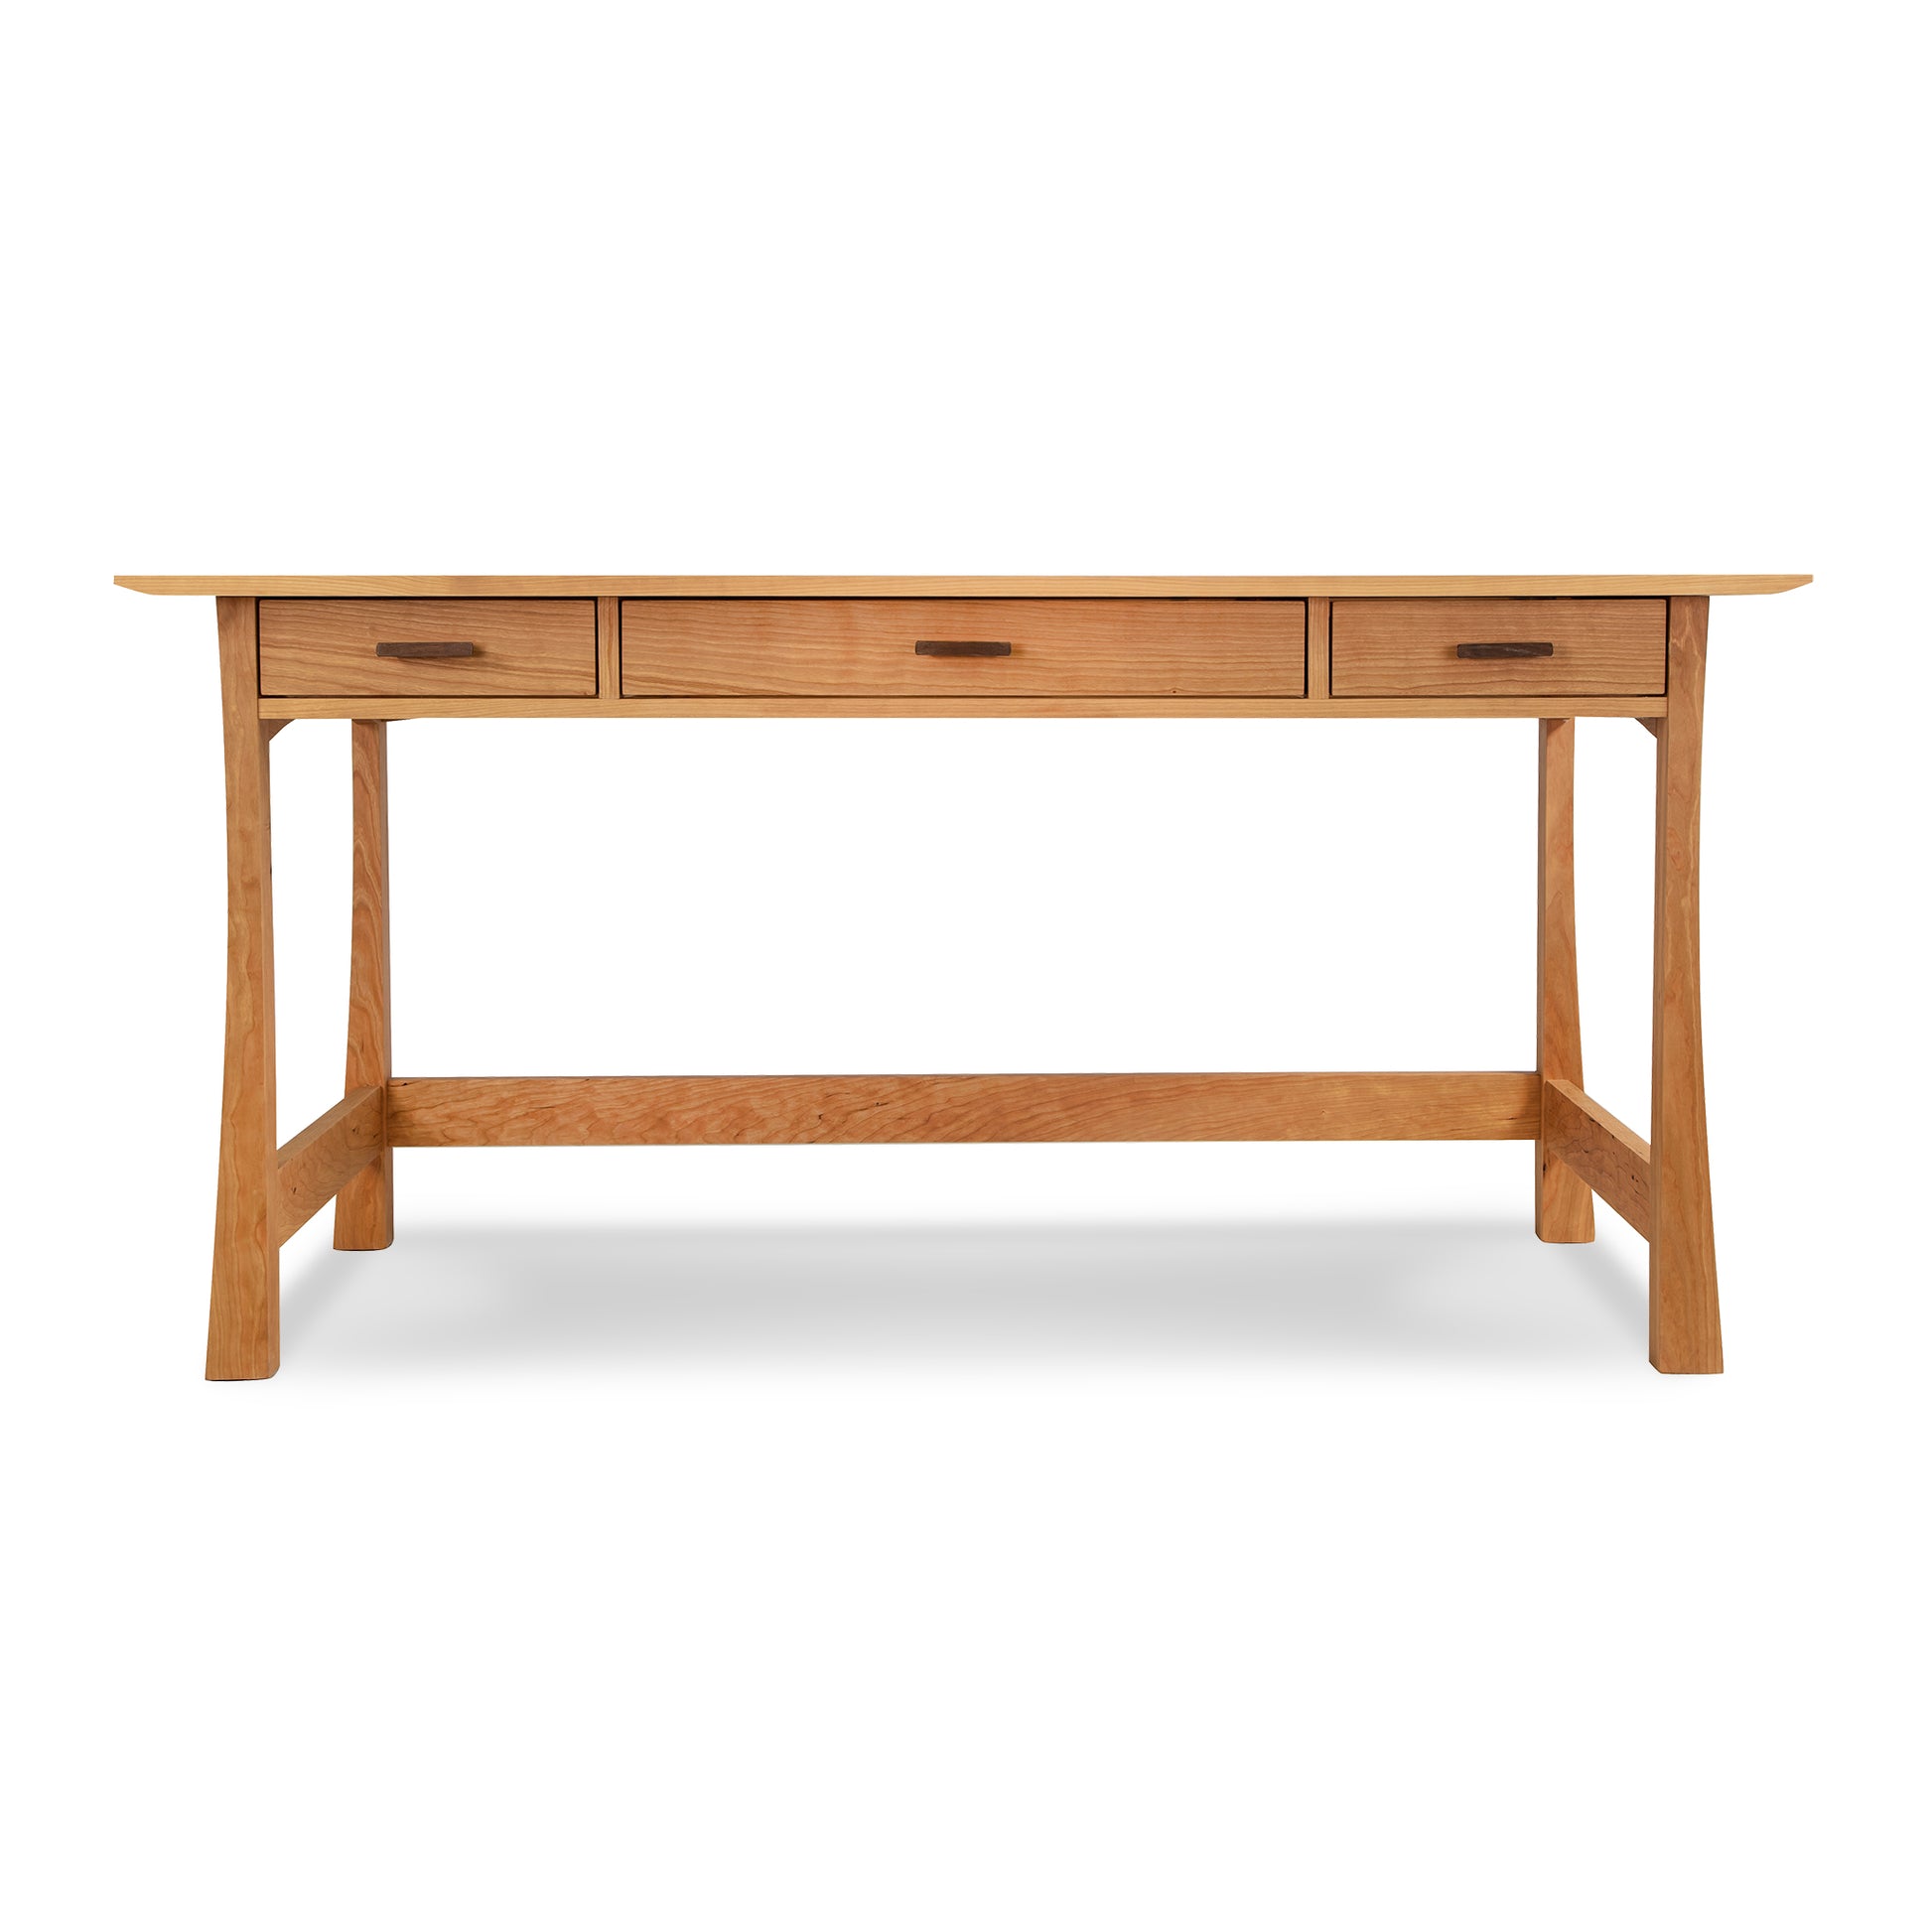 A solid Cherry Contemporary Craftsman Library Desk by Vermont Furniture Designs, featuring a clear finish, with three drawers and tapered legs, isolated on a white background.